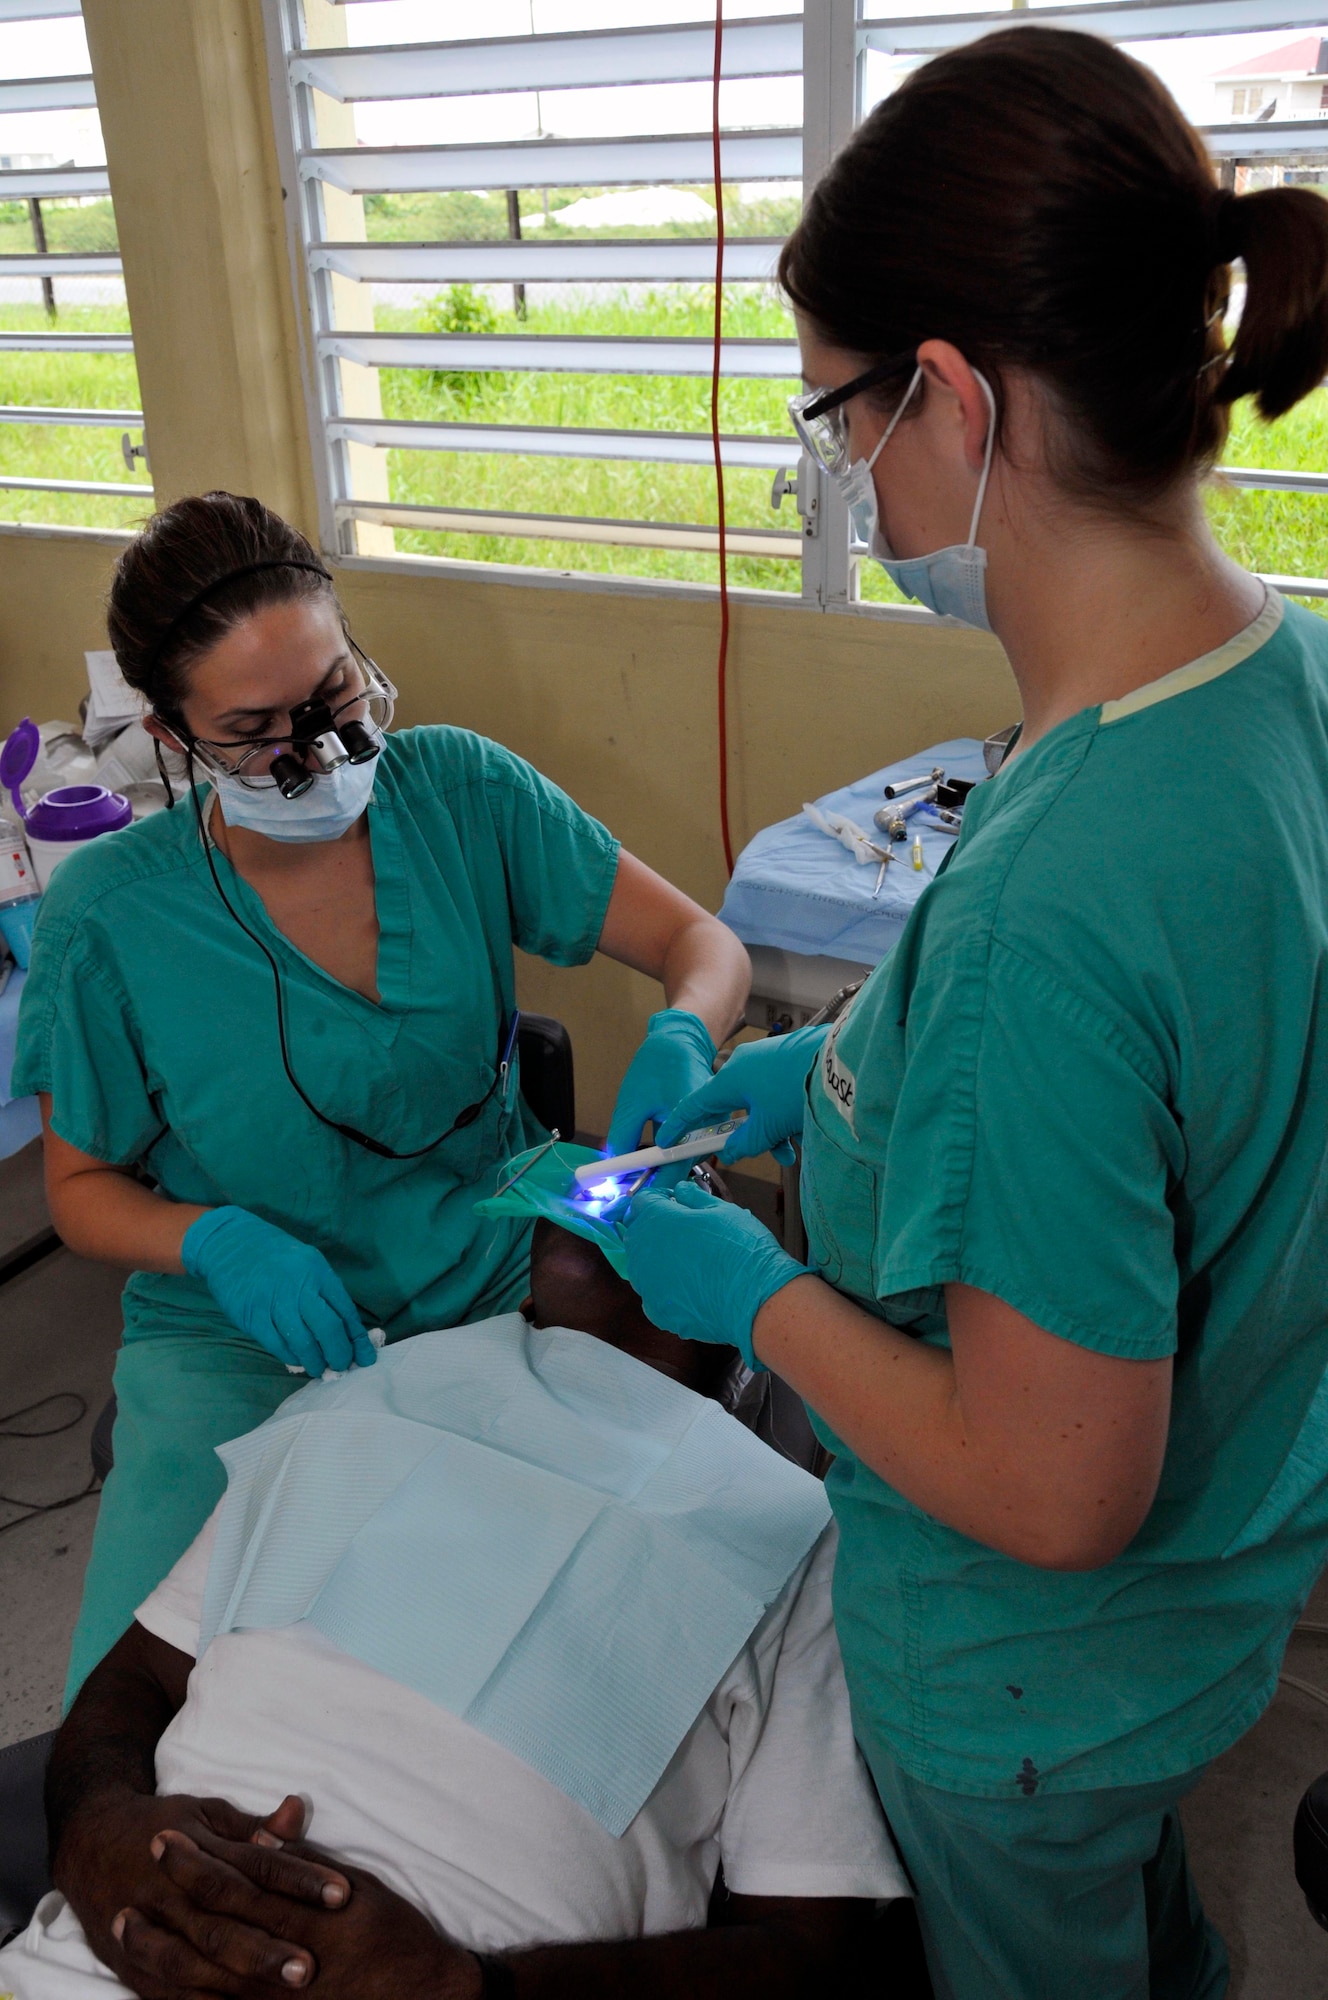 Capt. Kimberly Morio, Dentist, and Senior Airmen Brittany Grabowski, Dental Technician from the 375th Dental Squadron, Scott AFB, Illinois, hardens a Guyanese man's filling with a light curer, during New Horizons Guyana, at the Diamond School Aug 10, 2009, in Diamond, Guyana. New Horizons Guyana 2009 is a U.S. Southern Command-sponsored humanitarian event that will benefit thousands of Guyanese citizens in Georgetown and outlying areas.(U.S. Air Force photo by Airman 1st Class Perry Aston) (Released)